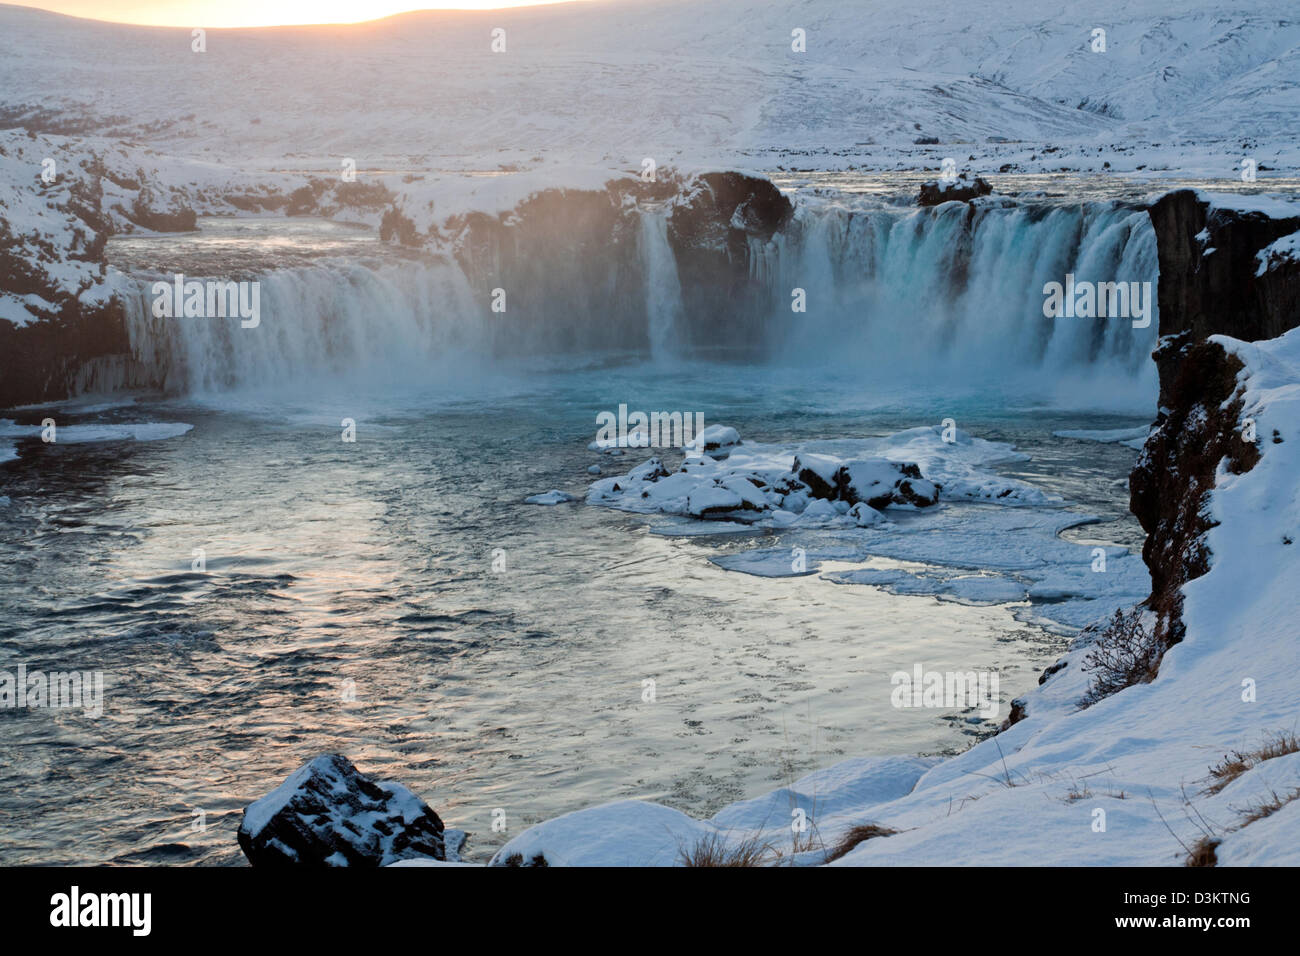 Waterfall in Iceland at sunset Stock Photo